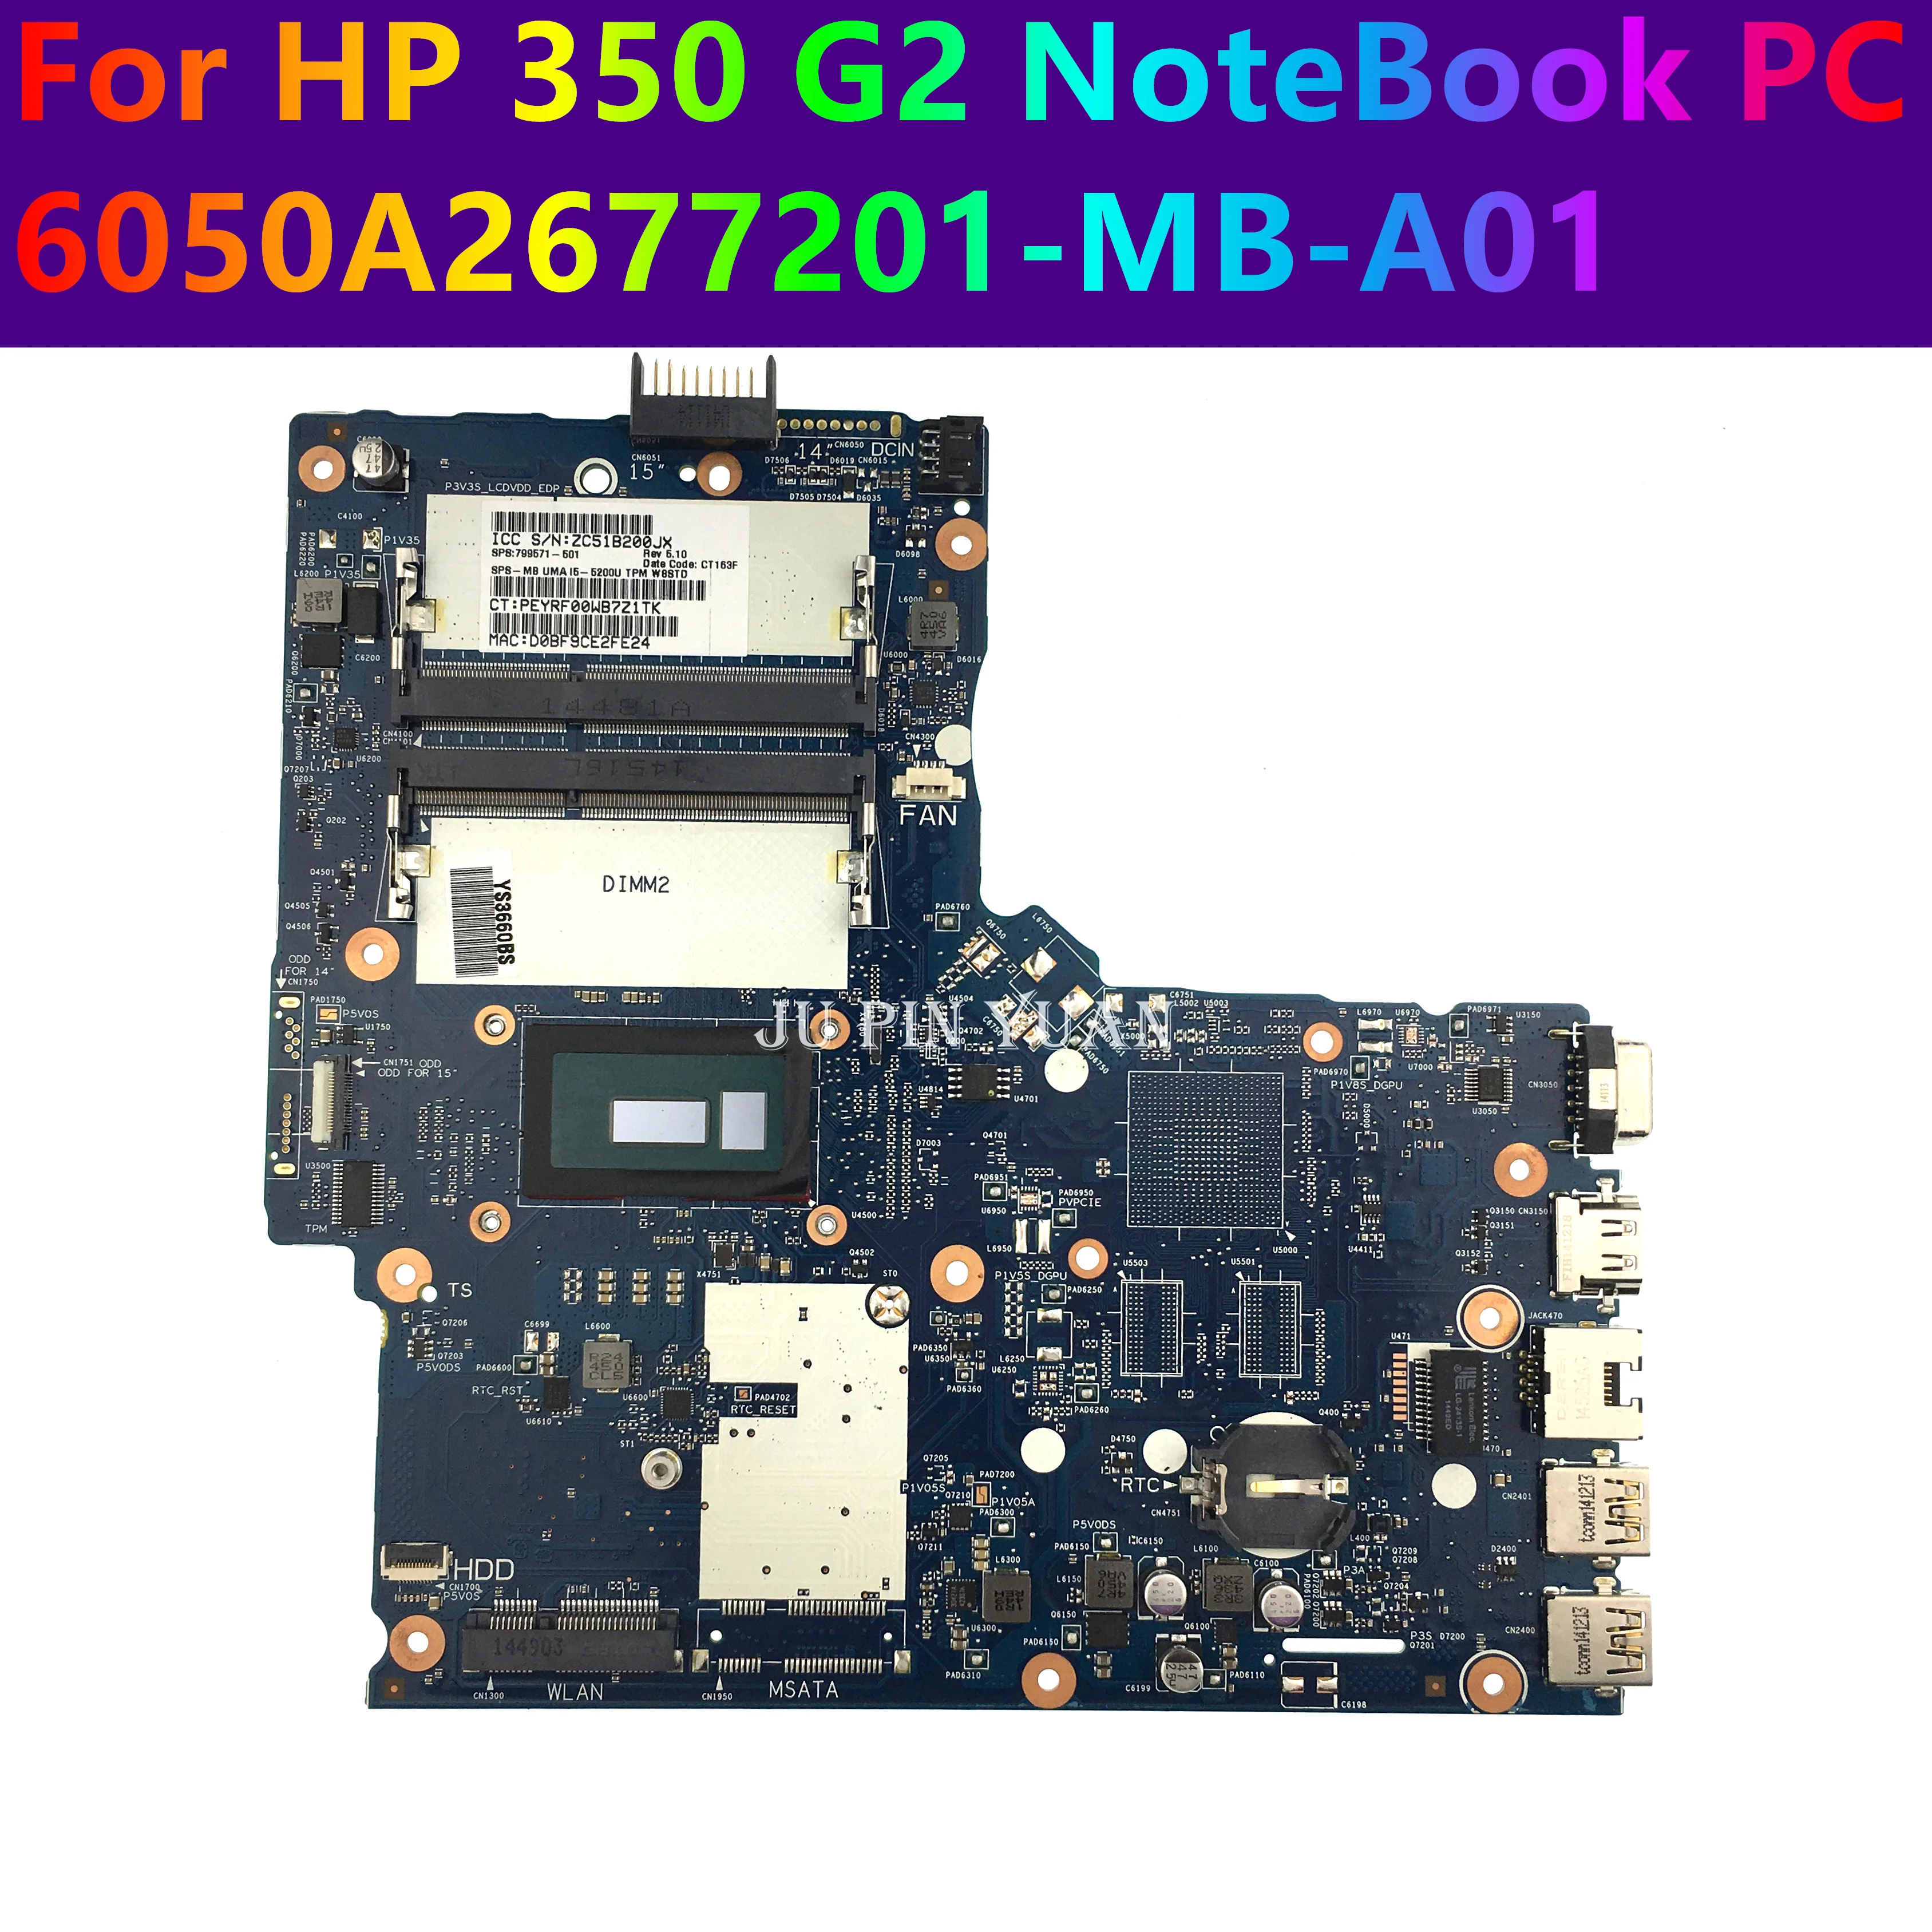 796382-001 801977-601   HP Notetbook 350 G1 G2   799571-001 799571-501 6050A2677201-MB-A01 100%  